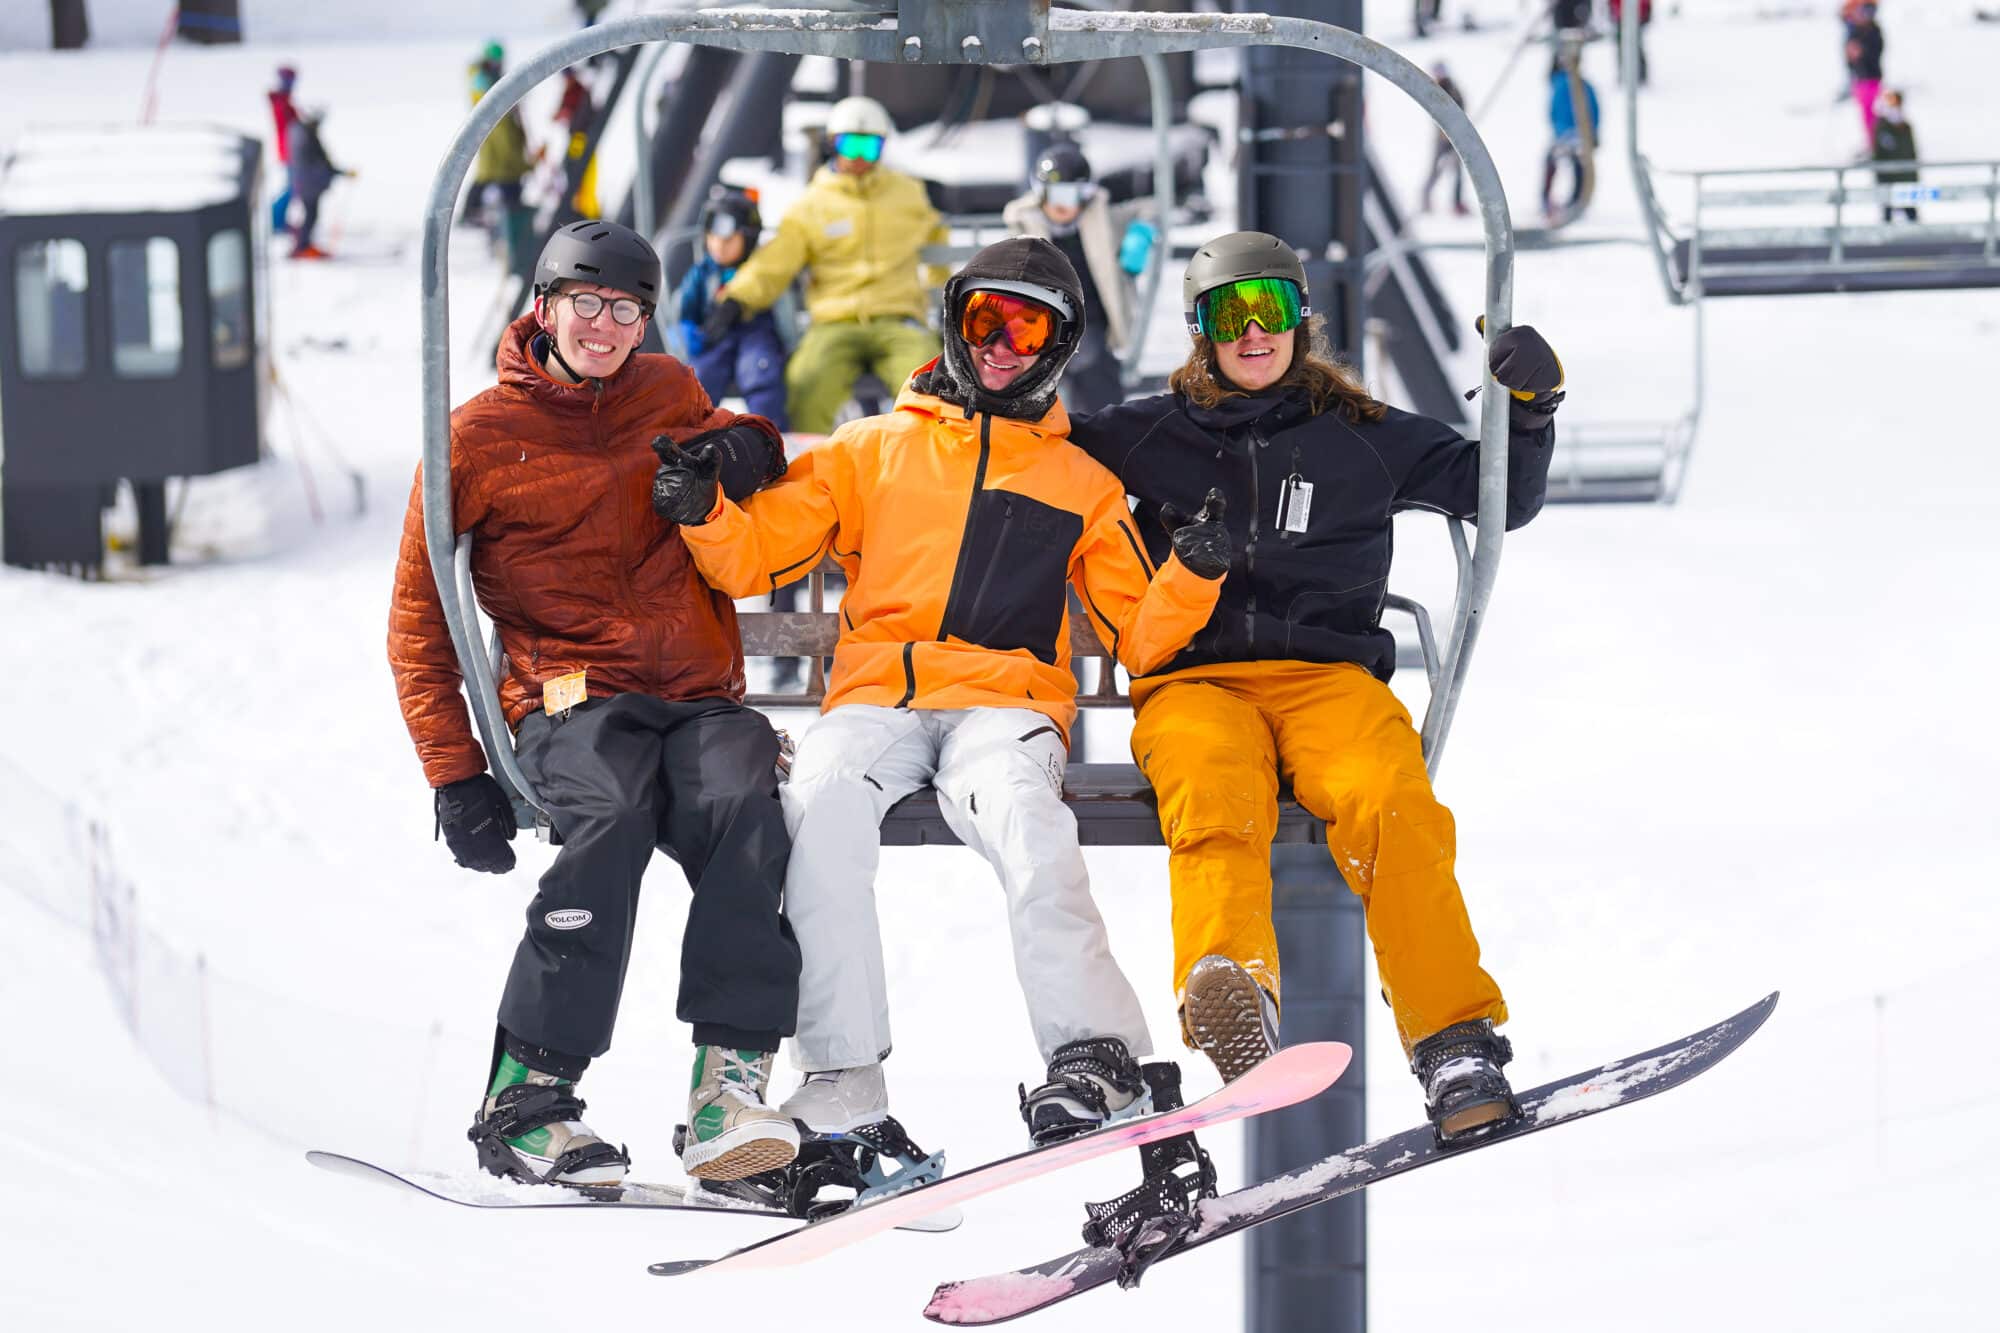 Three snowboarders sitting on a chairlift, smiling at the camera